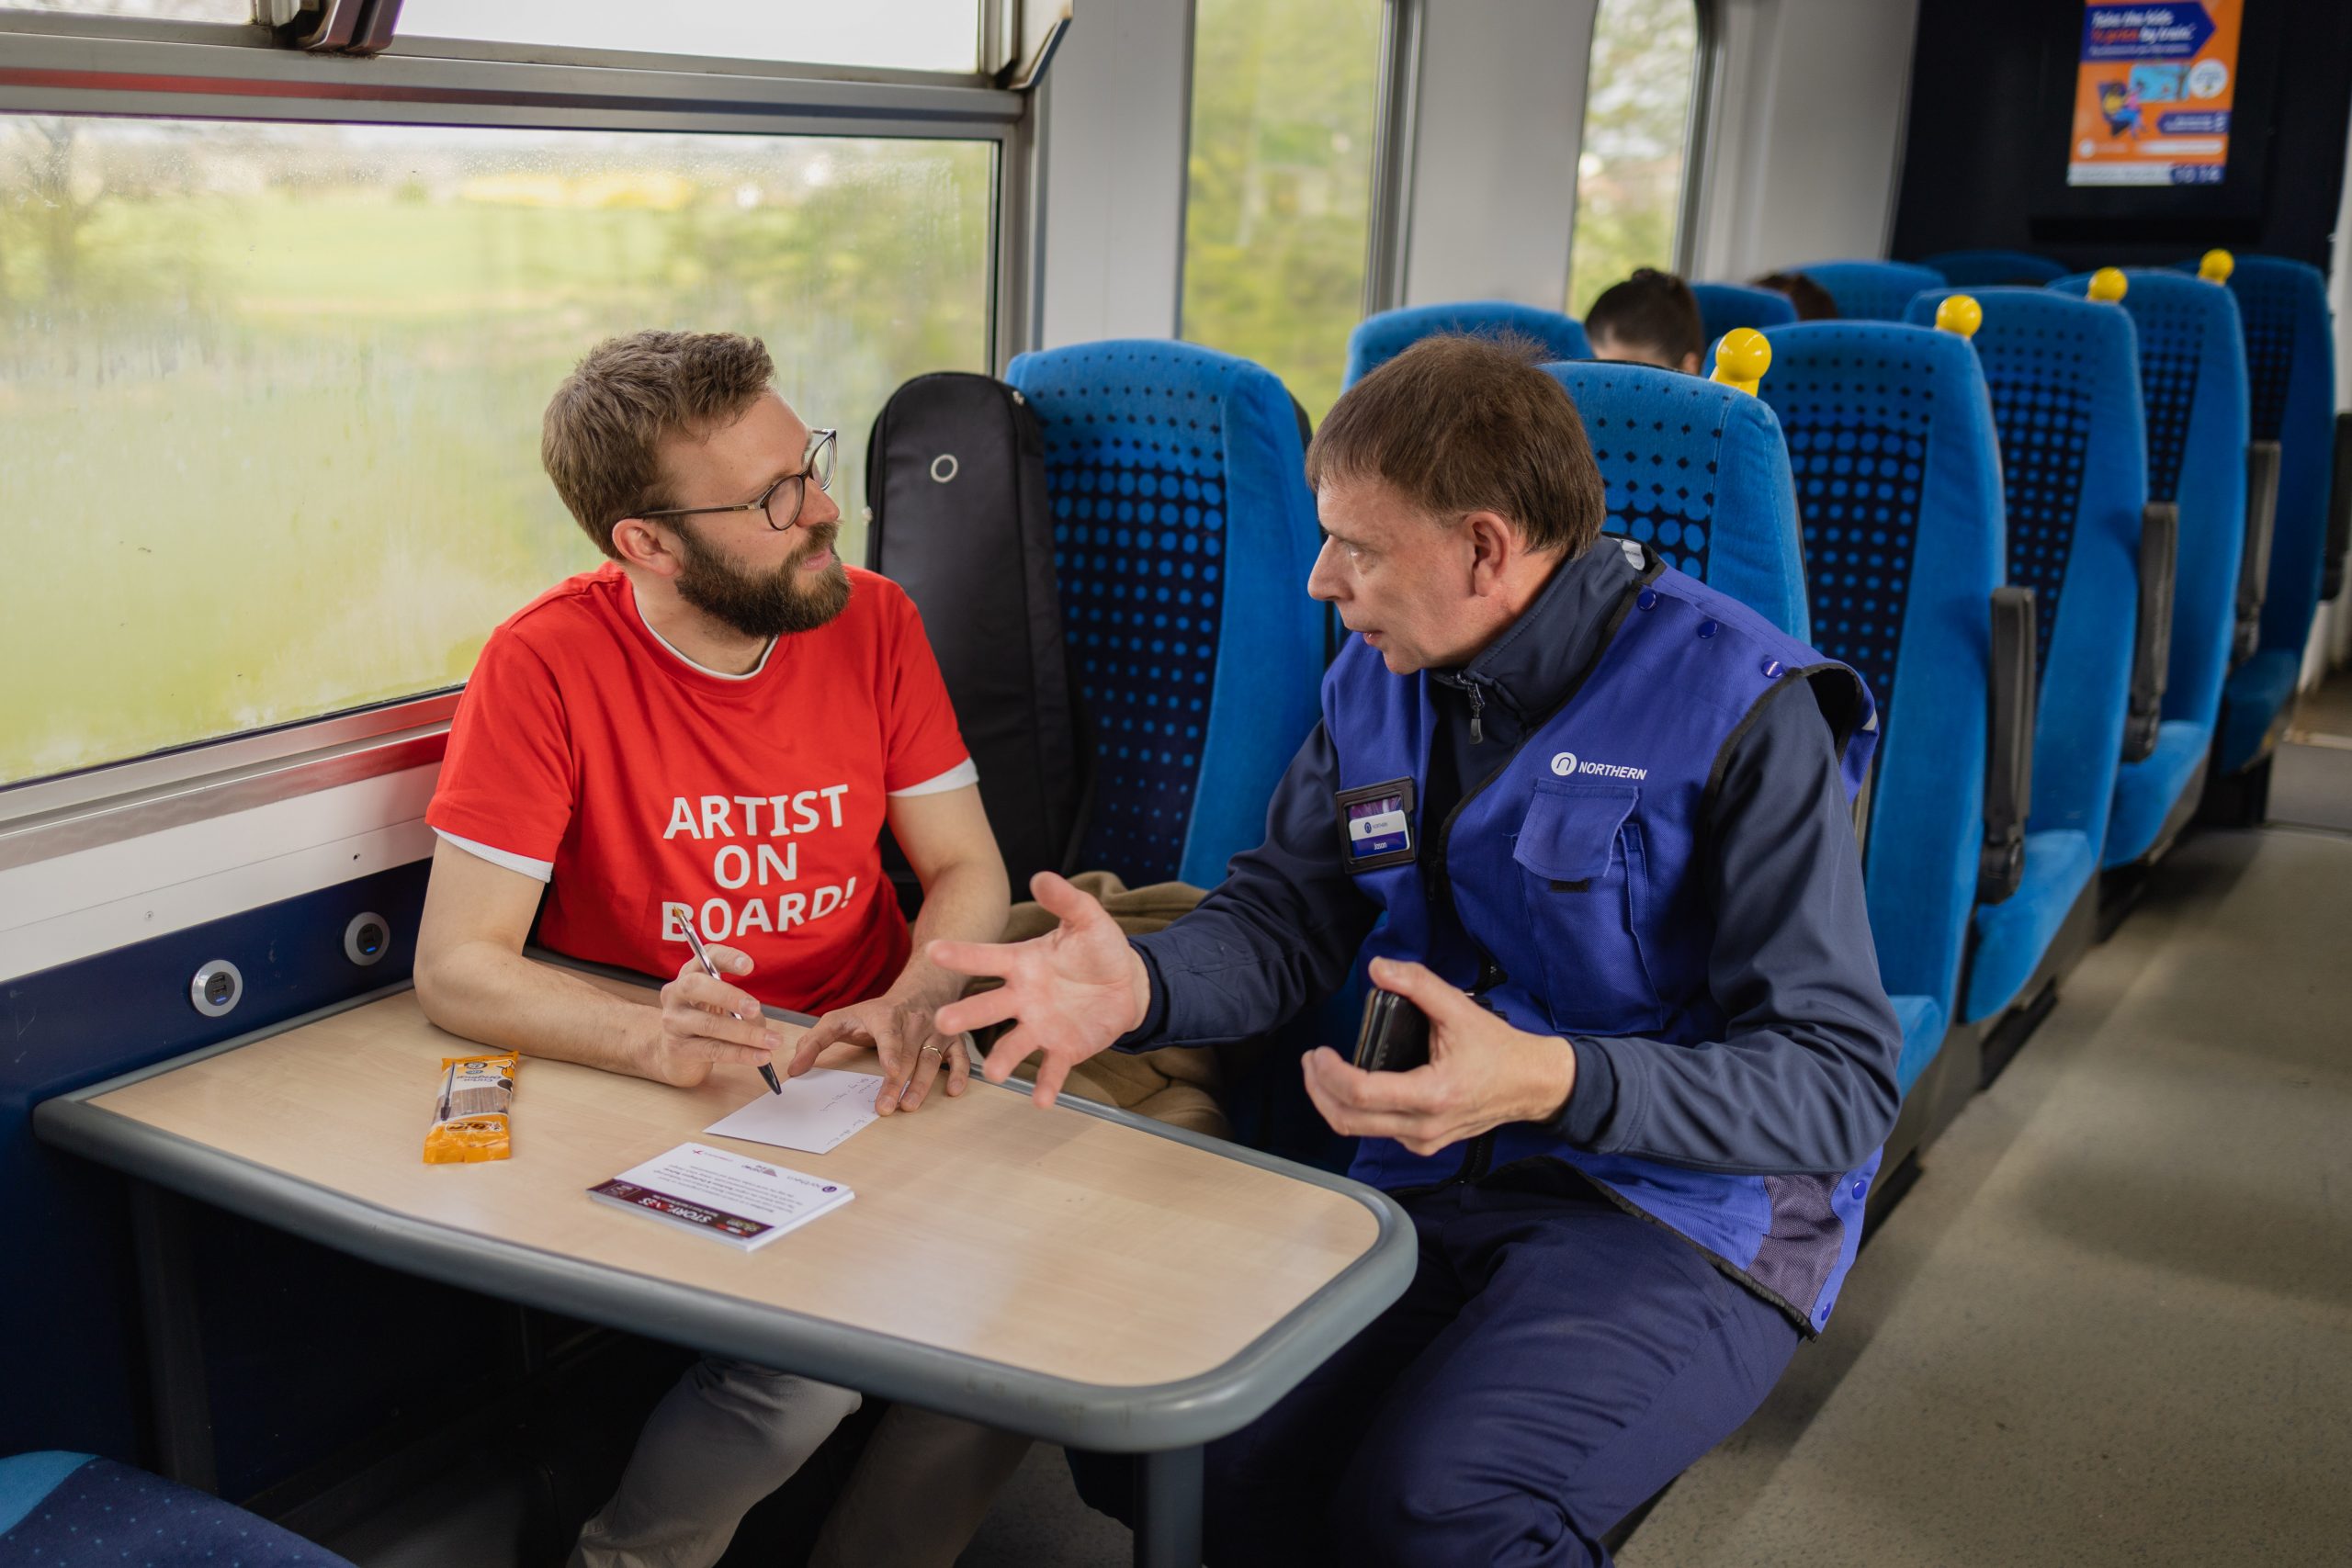 Sam Slatcher talking to a Northern conductor on the train